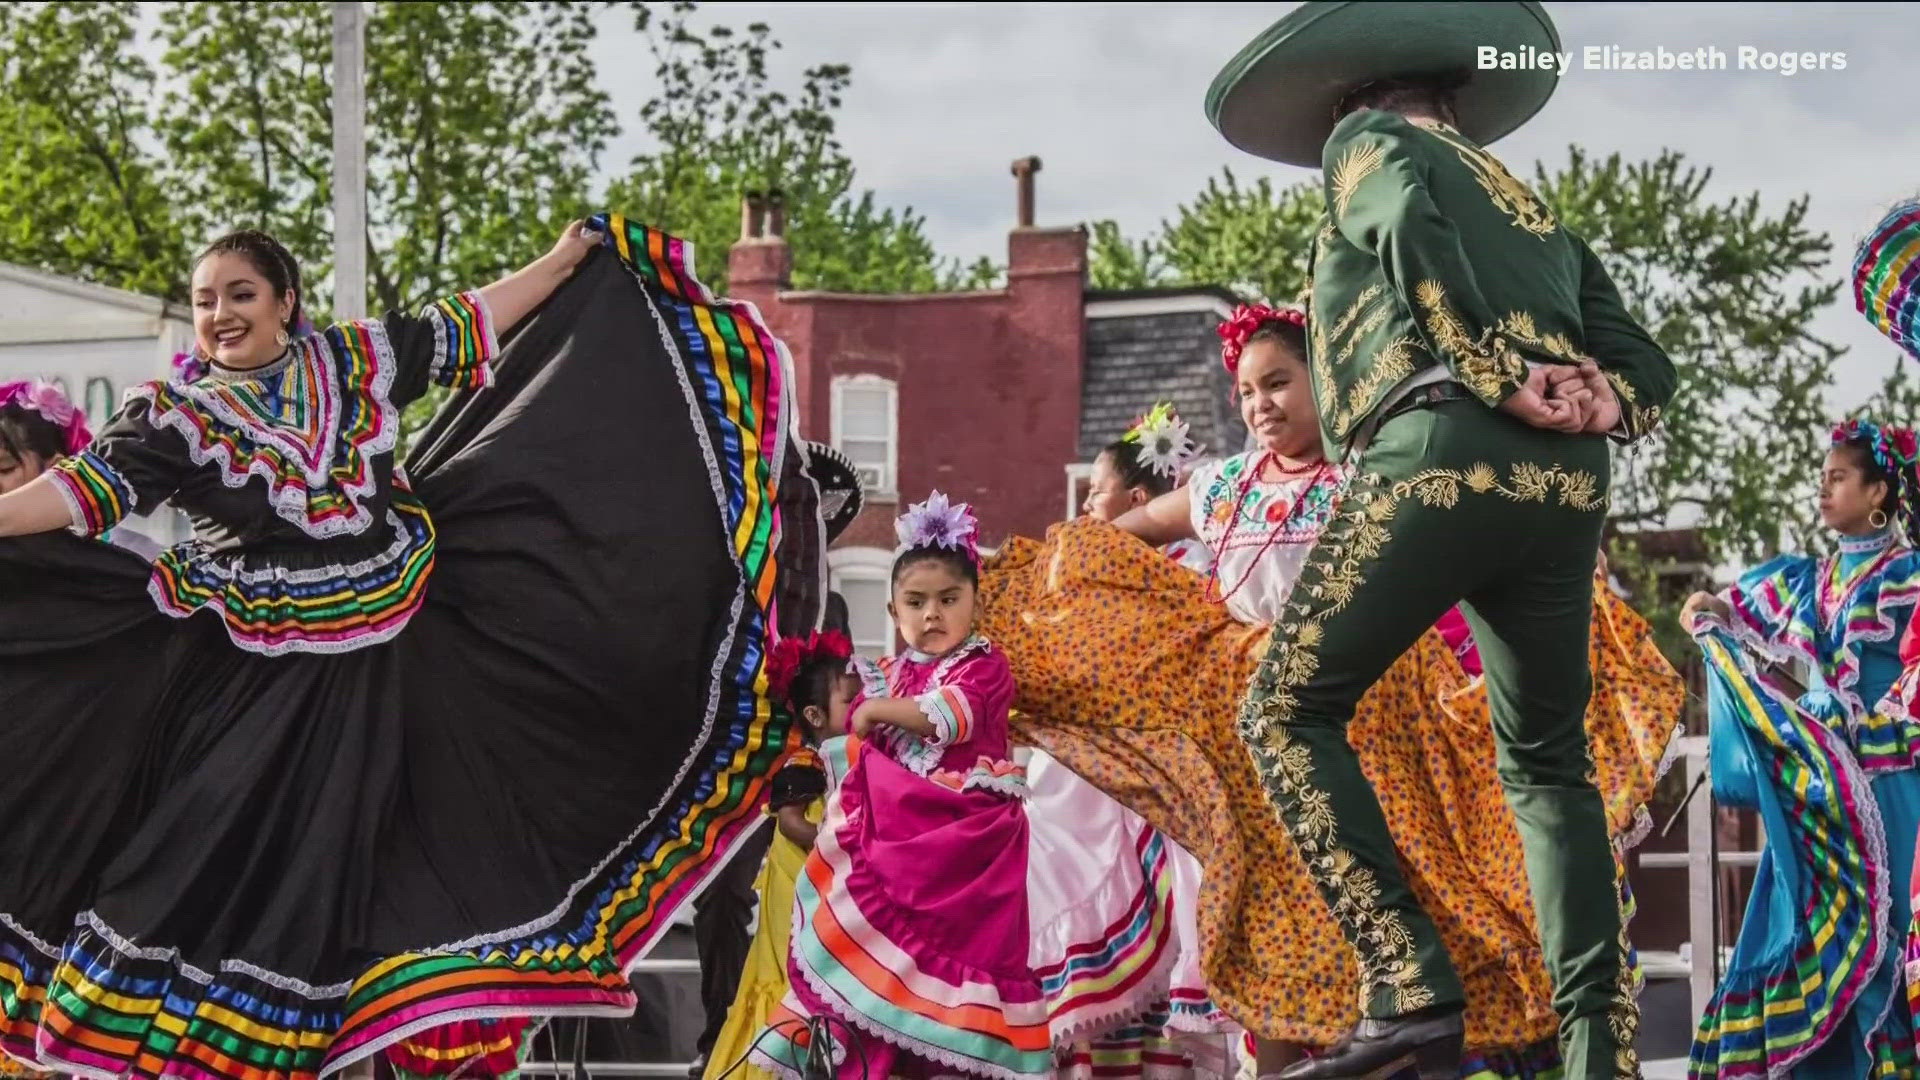 Check out what Cinco de Mayo events are happening across Arkansas this weekend!